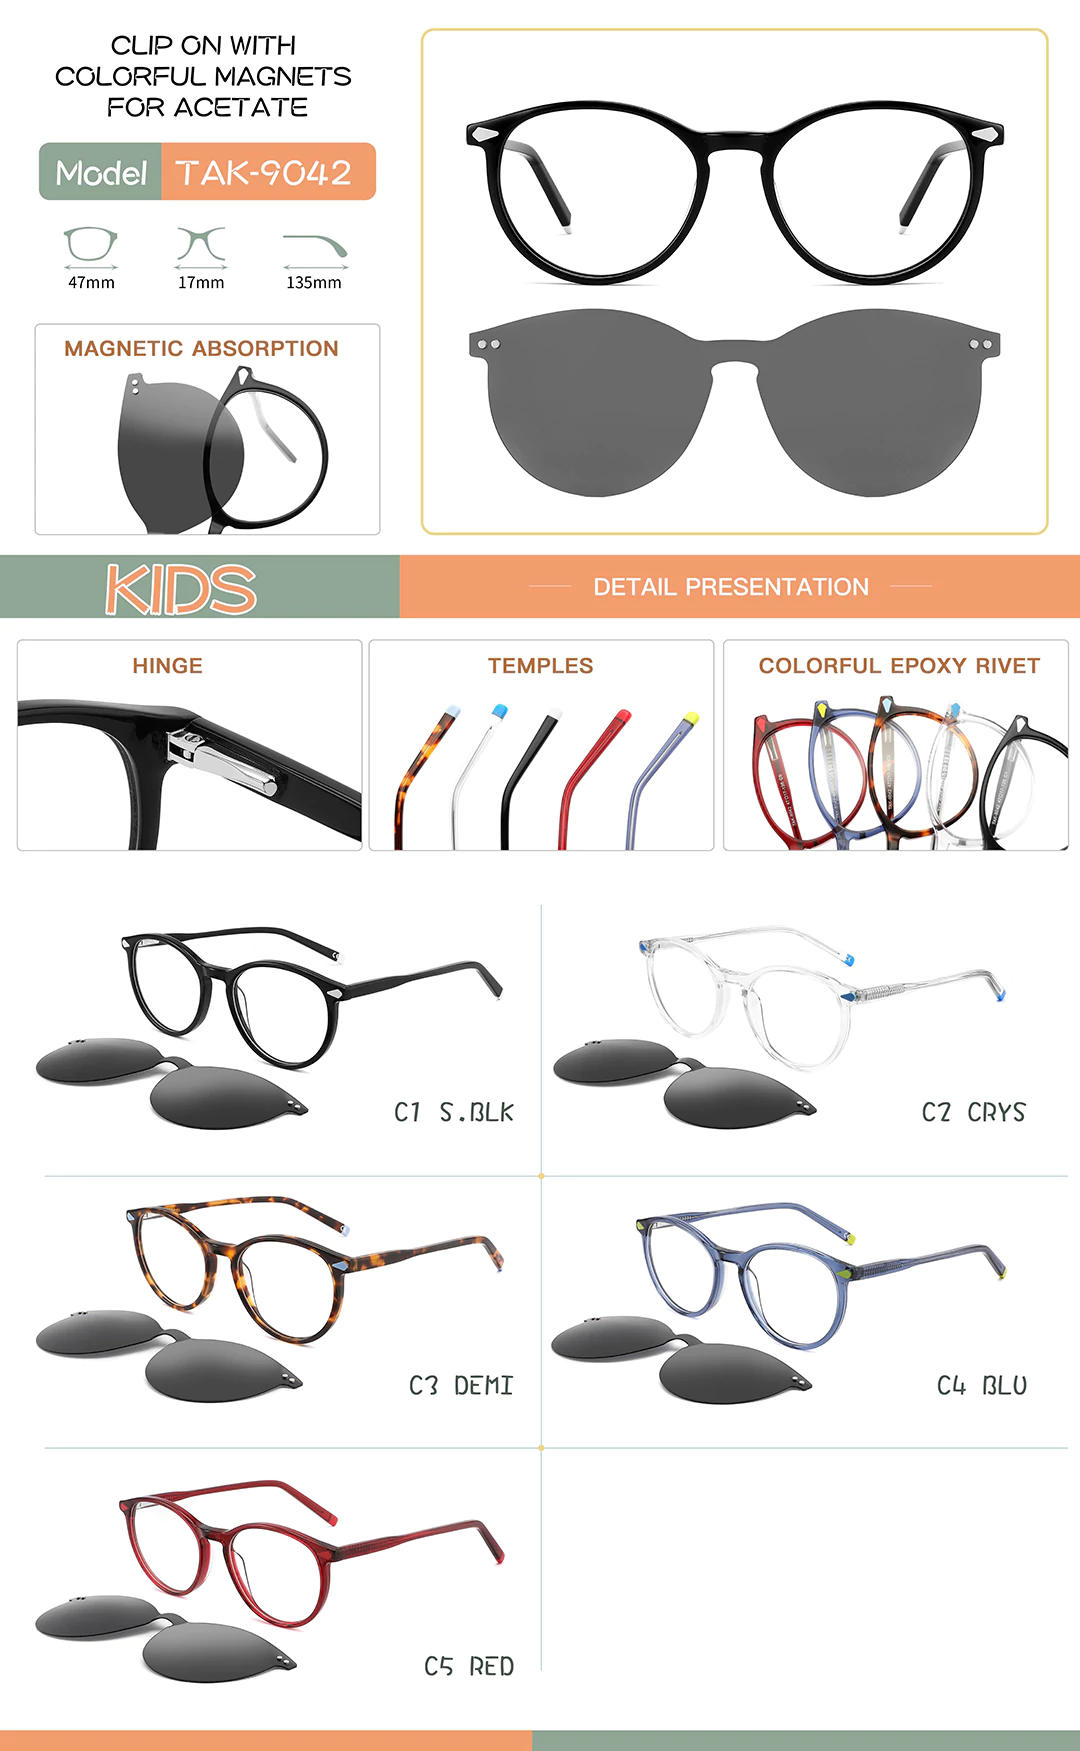 Children's Magnetic Clip-On Eyeglasses Set TAK9042 Sizes and Details Shot and Different Colors Shown